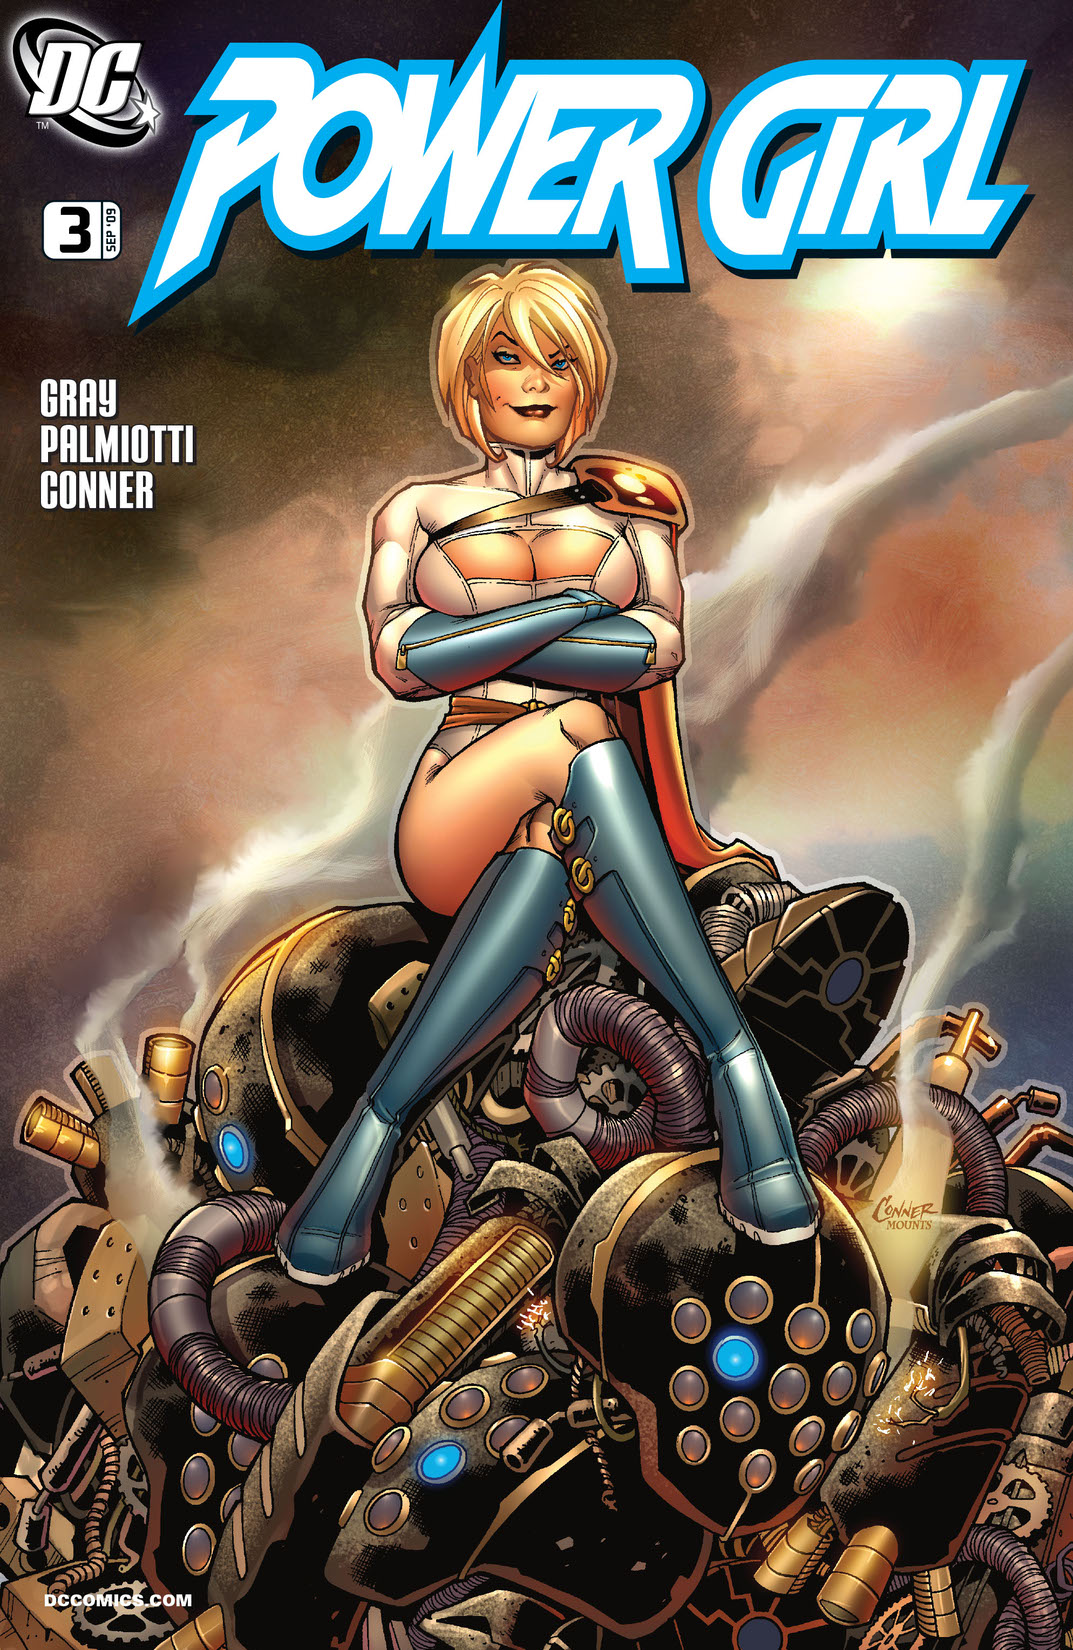 Power Girl (2009-) #3 preview images